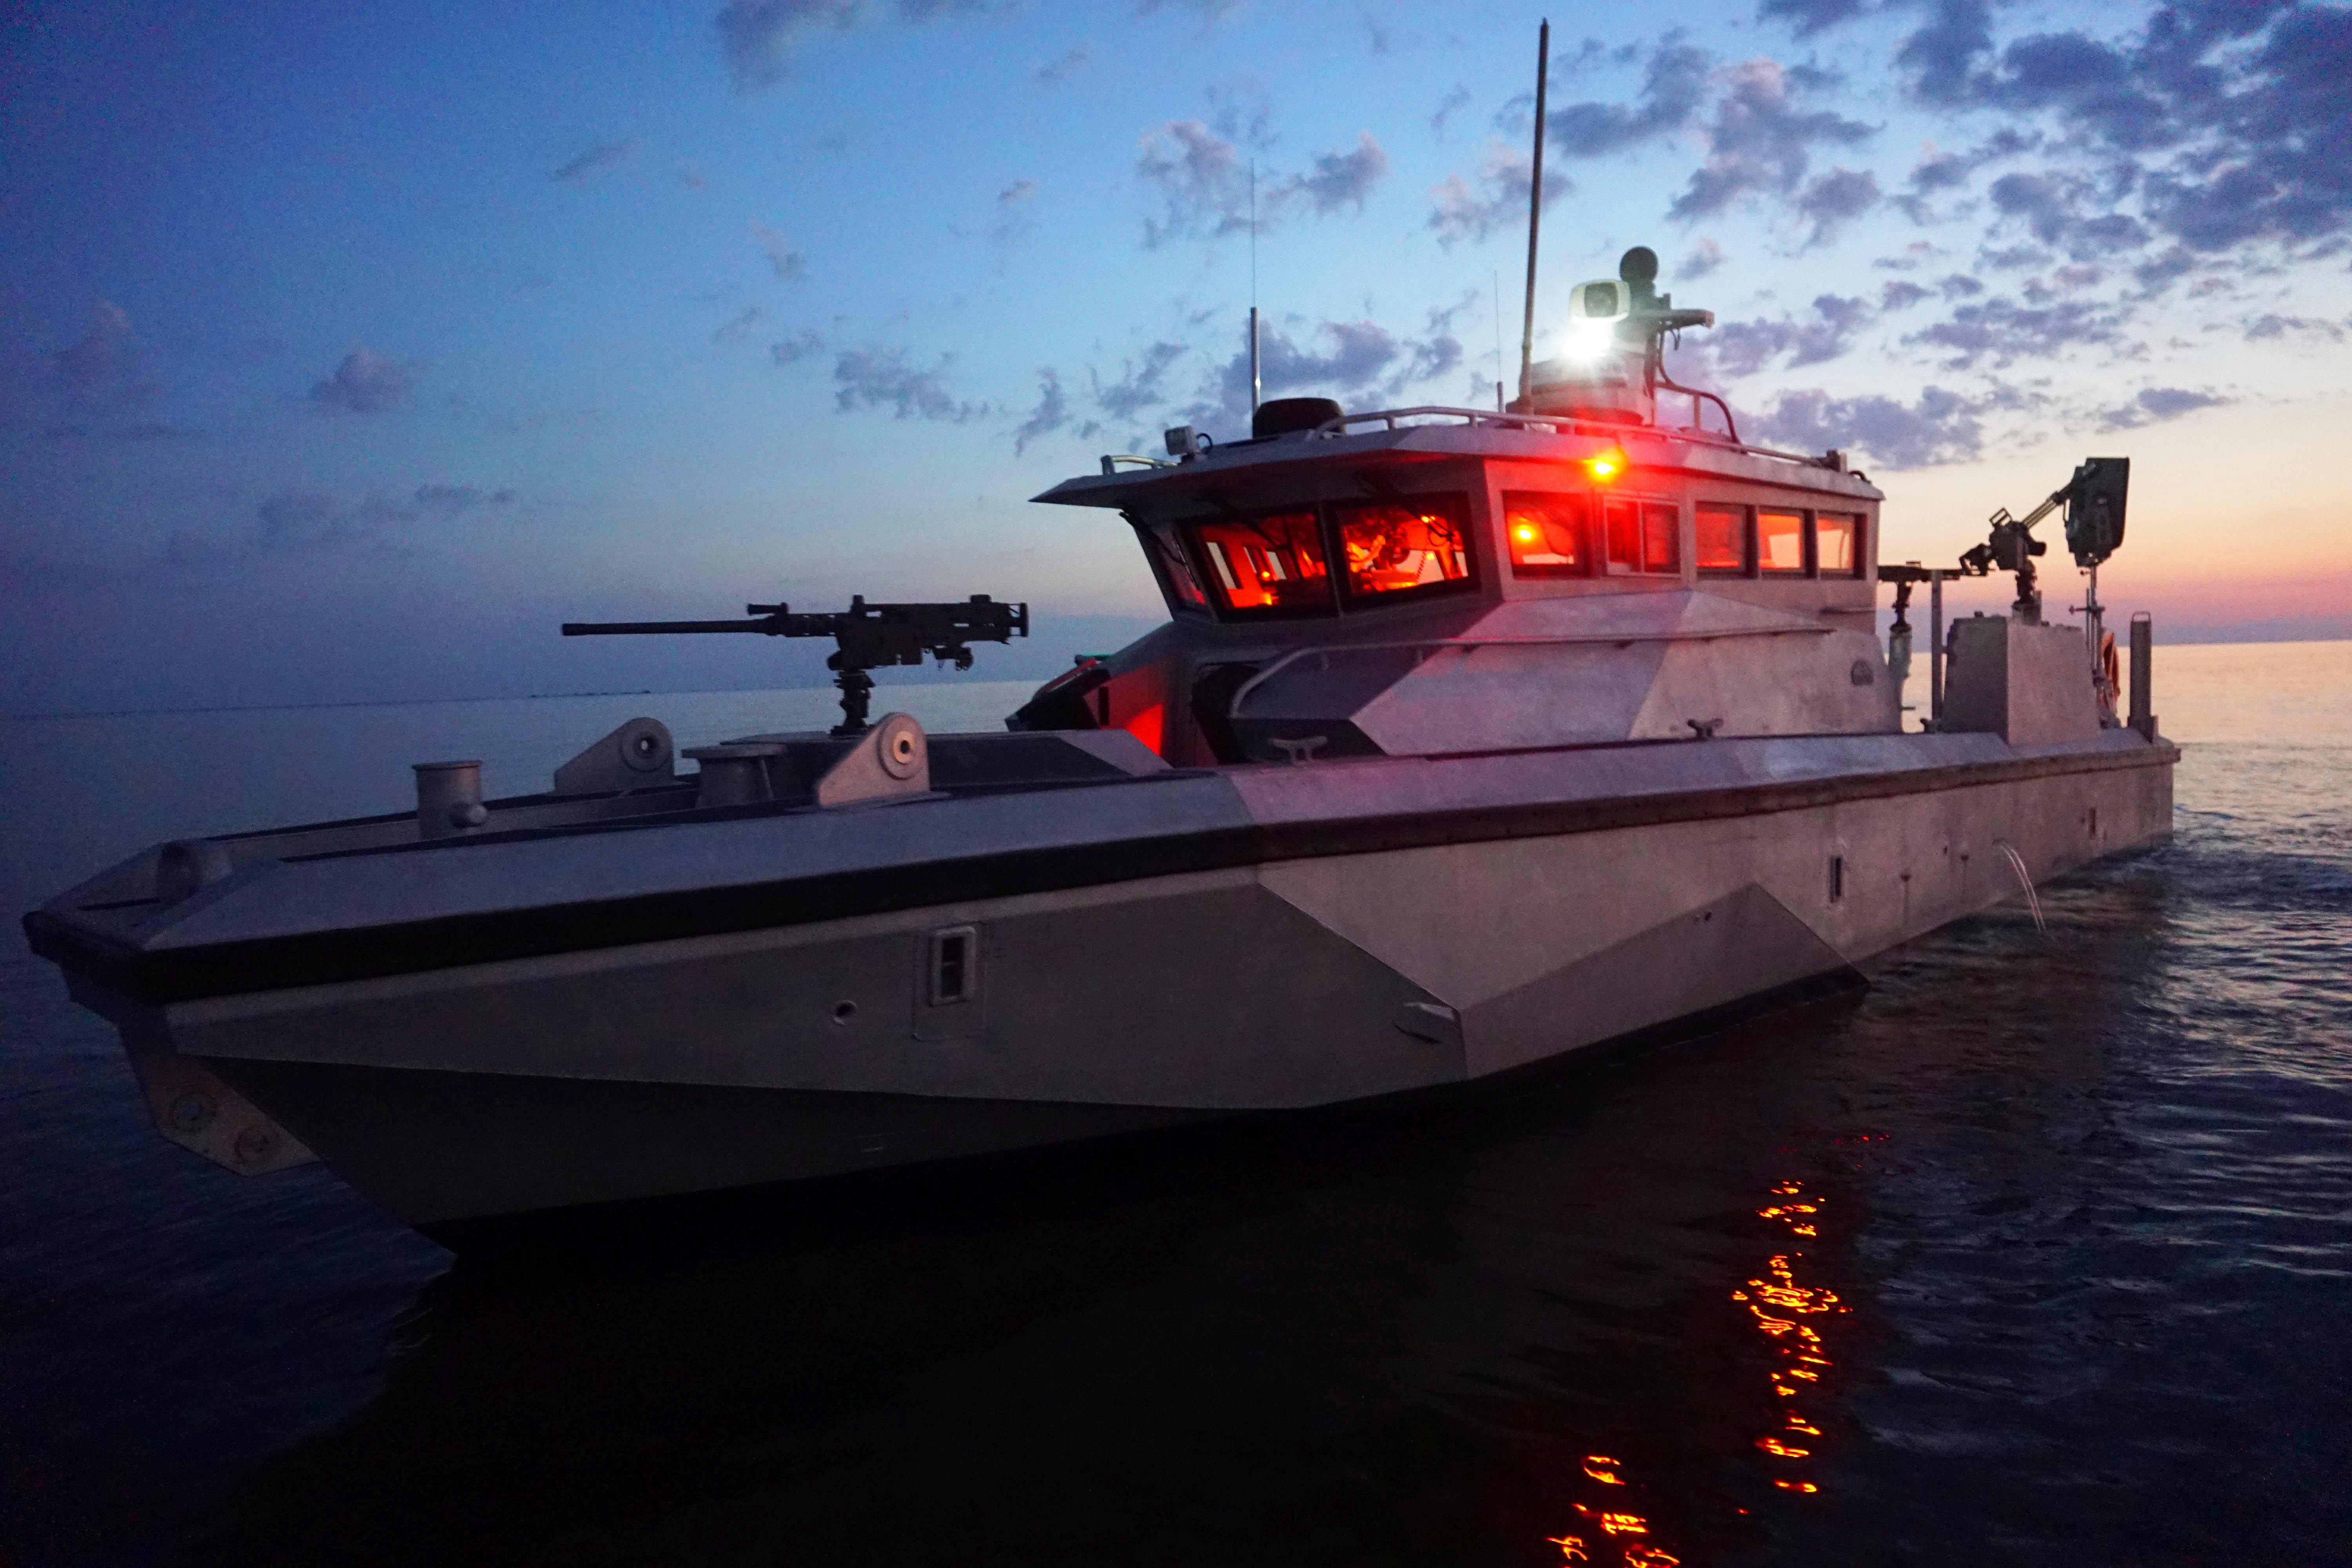 Metal Shark to Commence Full-Rate Production of the US Navy’s Next-Generation Patrol Boat